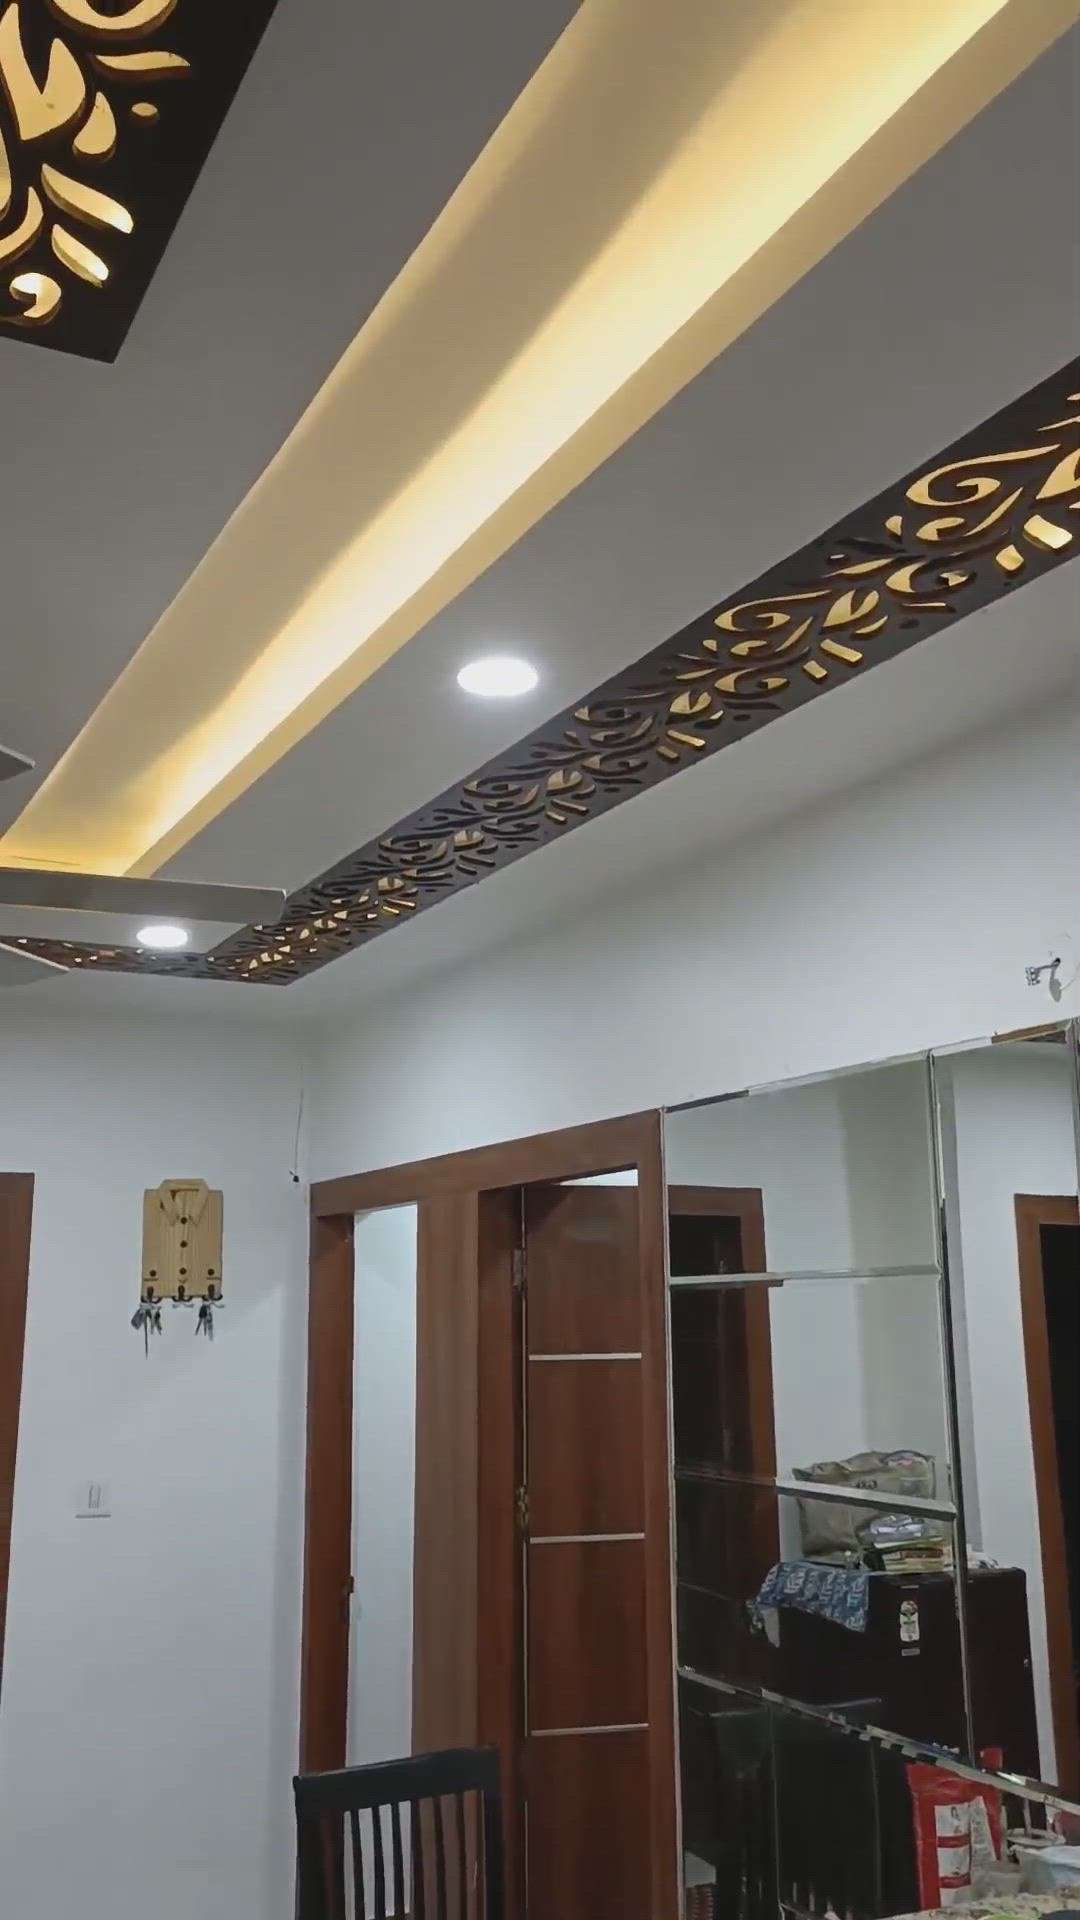 Ceiling, Living, Furniture, Home Decor, Kitchen, Bedroom Designs by Interior Designer A-one interiors, Faridabad | Kolo